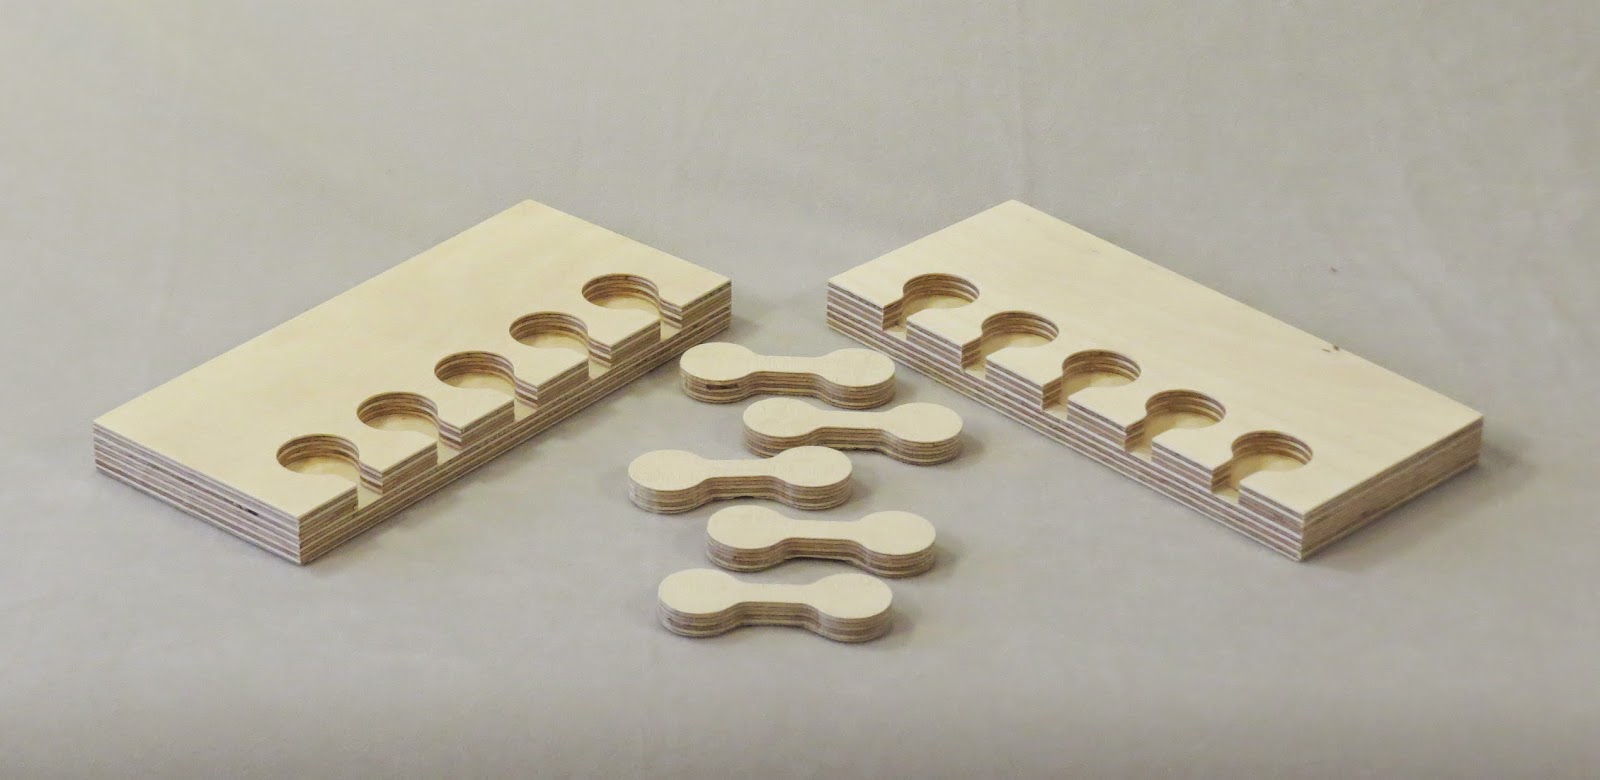 Digital Fabrication for Designers: CNC Cut Wood Joinery